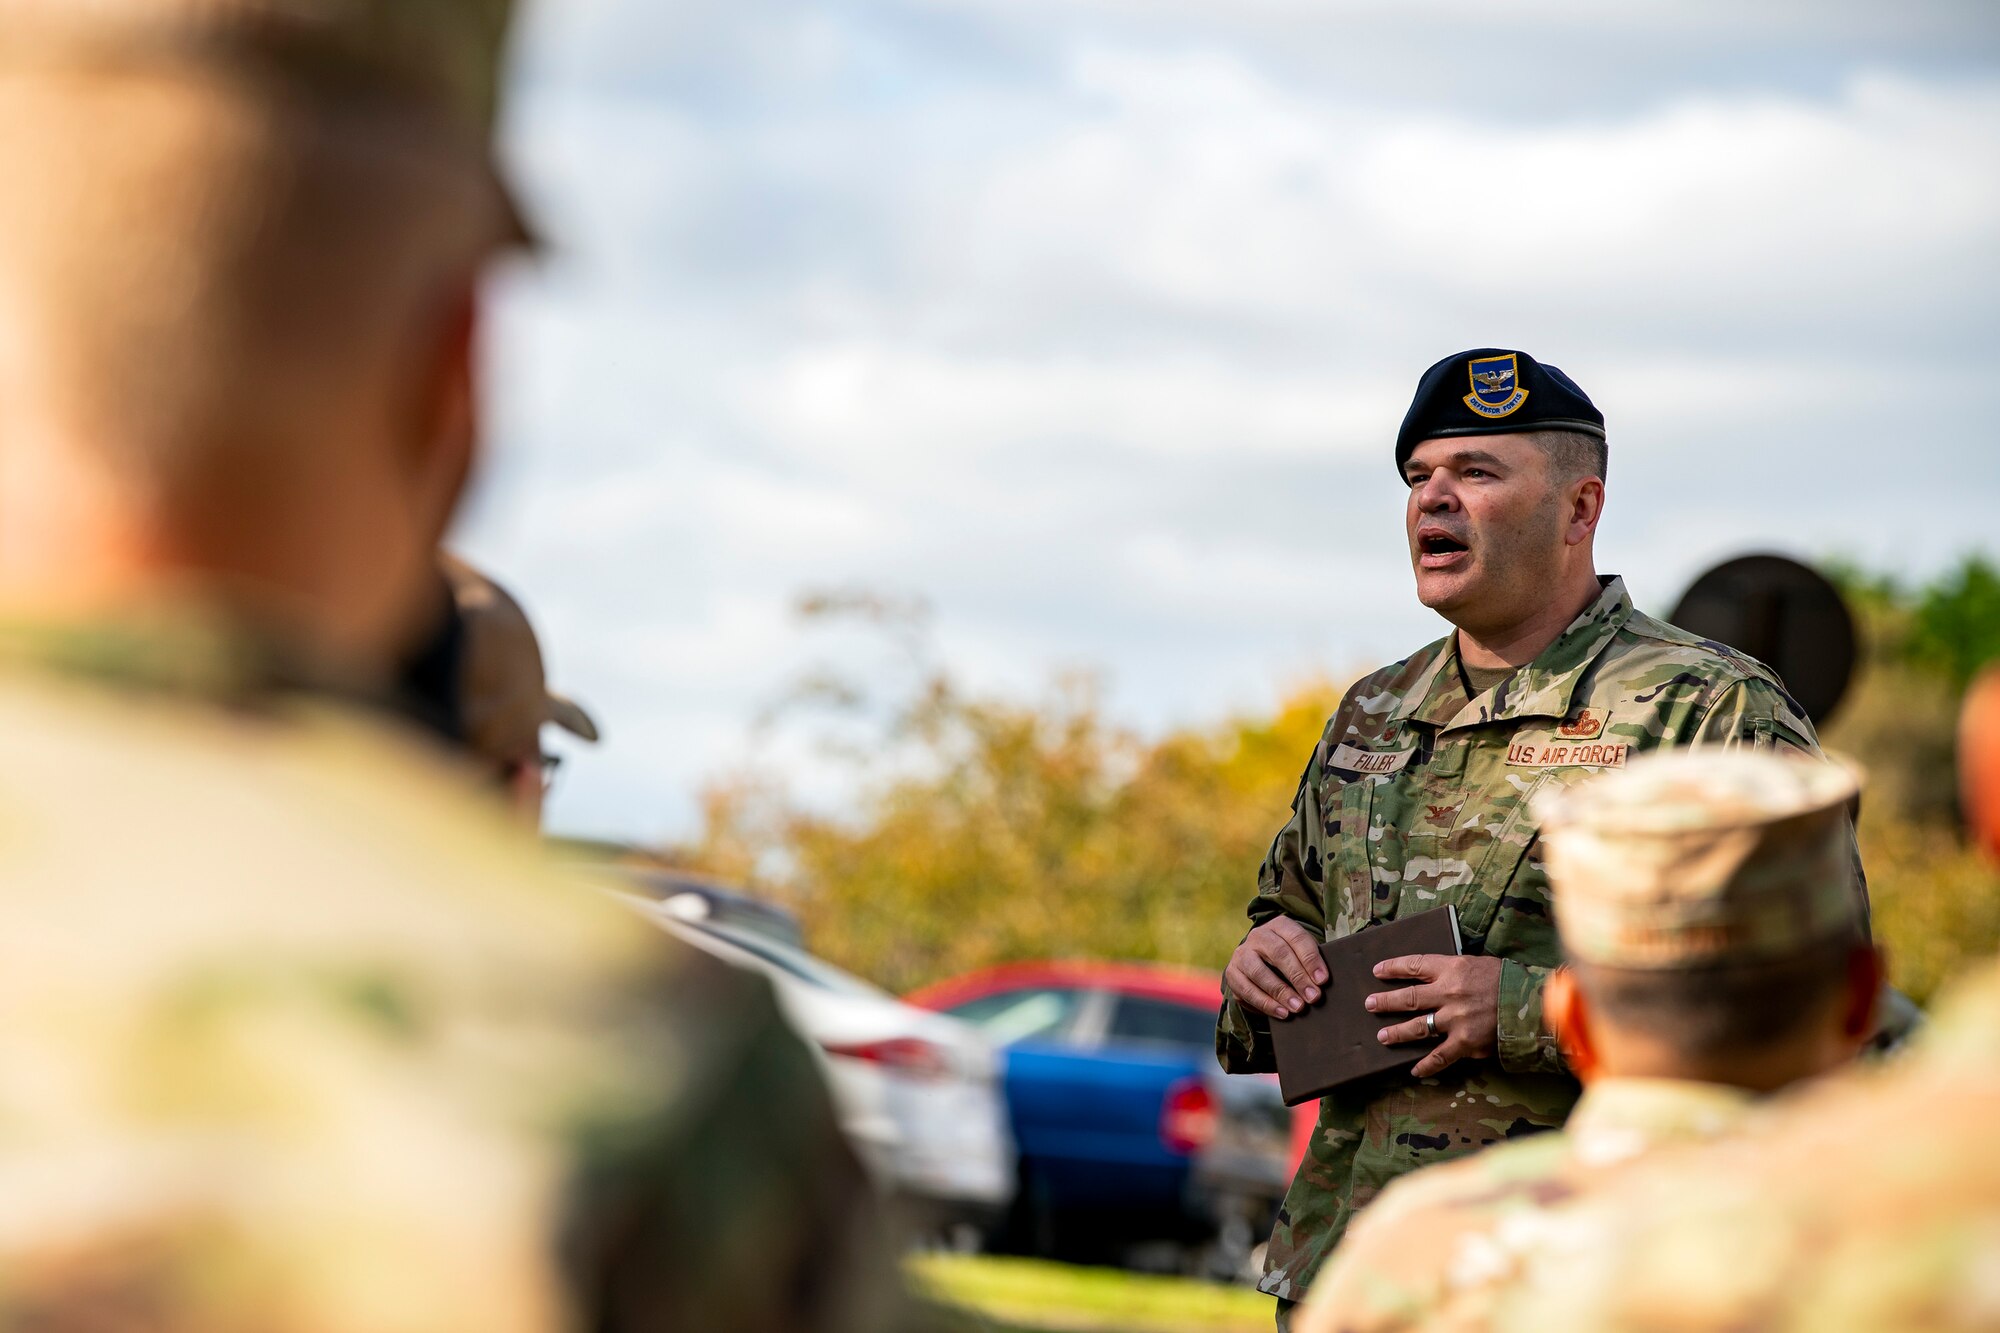 U.S. Air Force Col. Brian Filler, 501st Combat Support Wing commander, speaks during a retreat ceremony at RAF Croughton, England, Oct. 15, 2021. The ceremony concluded Police week in which defenders from the 422d and 423rd Security Forces Squadrons paid homage to those who lost their lives in the line of duty. (U.S. Air Force photo by Senior Airman Eugene Oliver)